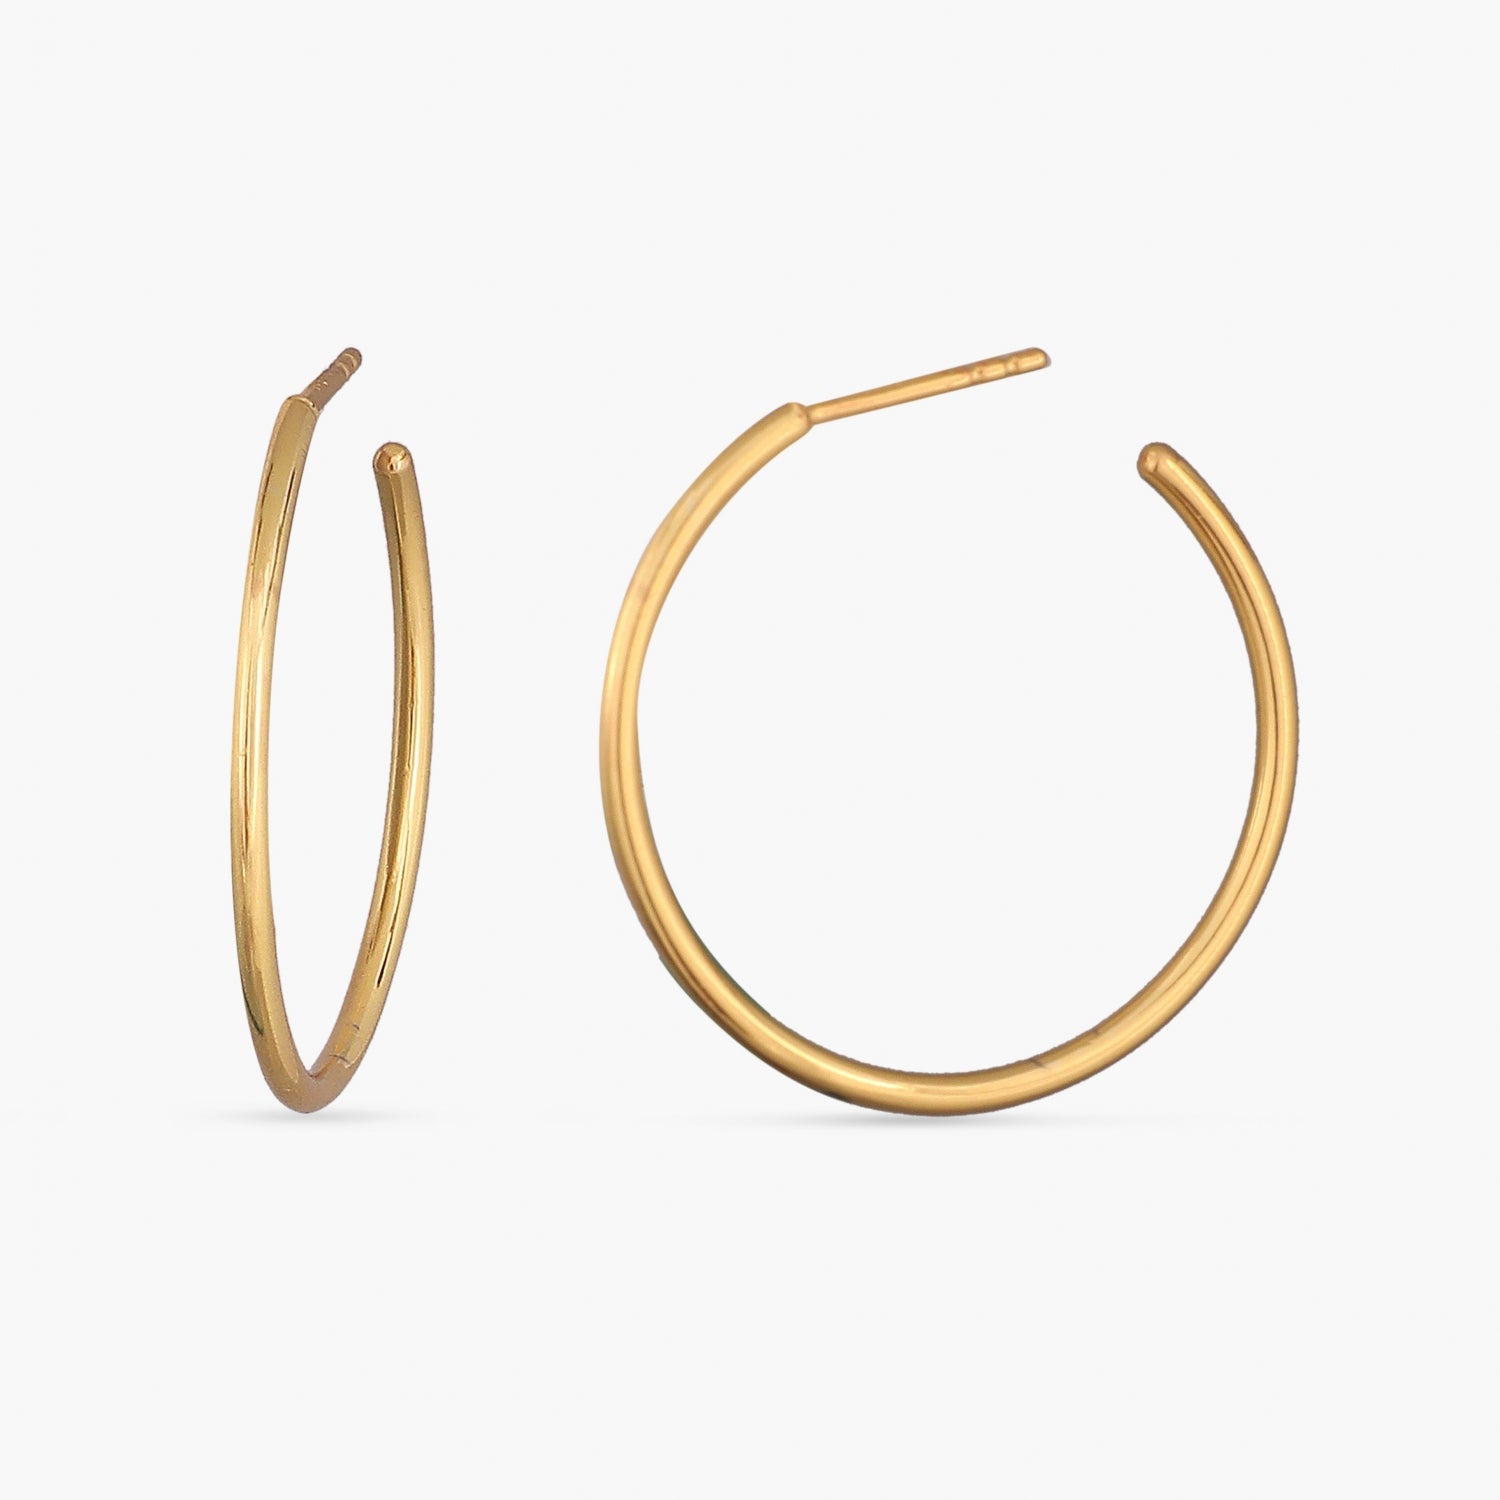 Buy 10 Mm Beating The Monday Blues Mini Hoop Earrings In 925 Silver from  Shaya by CaratLane